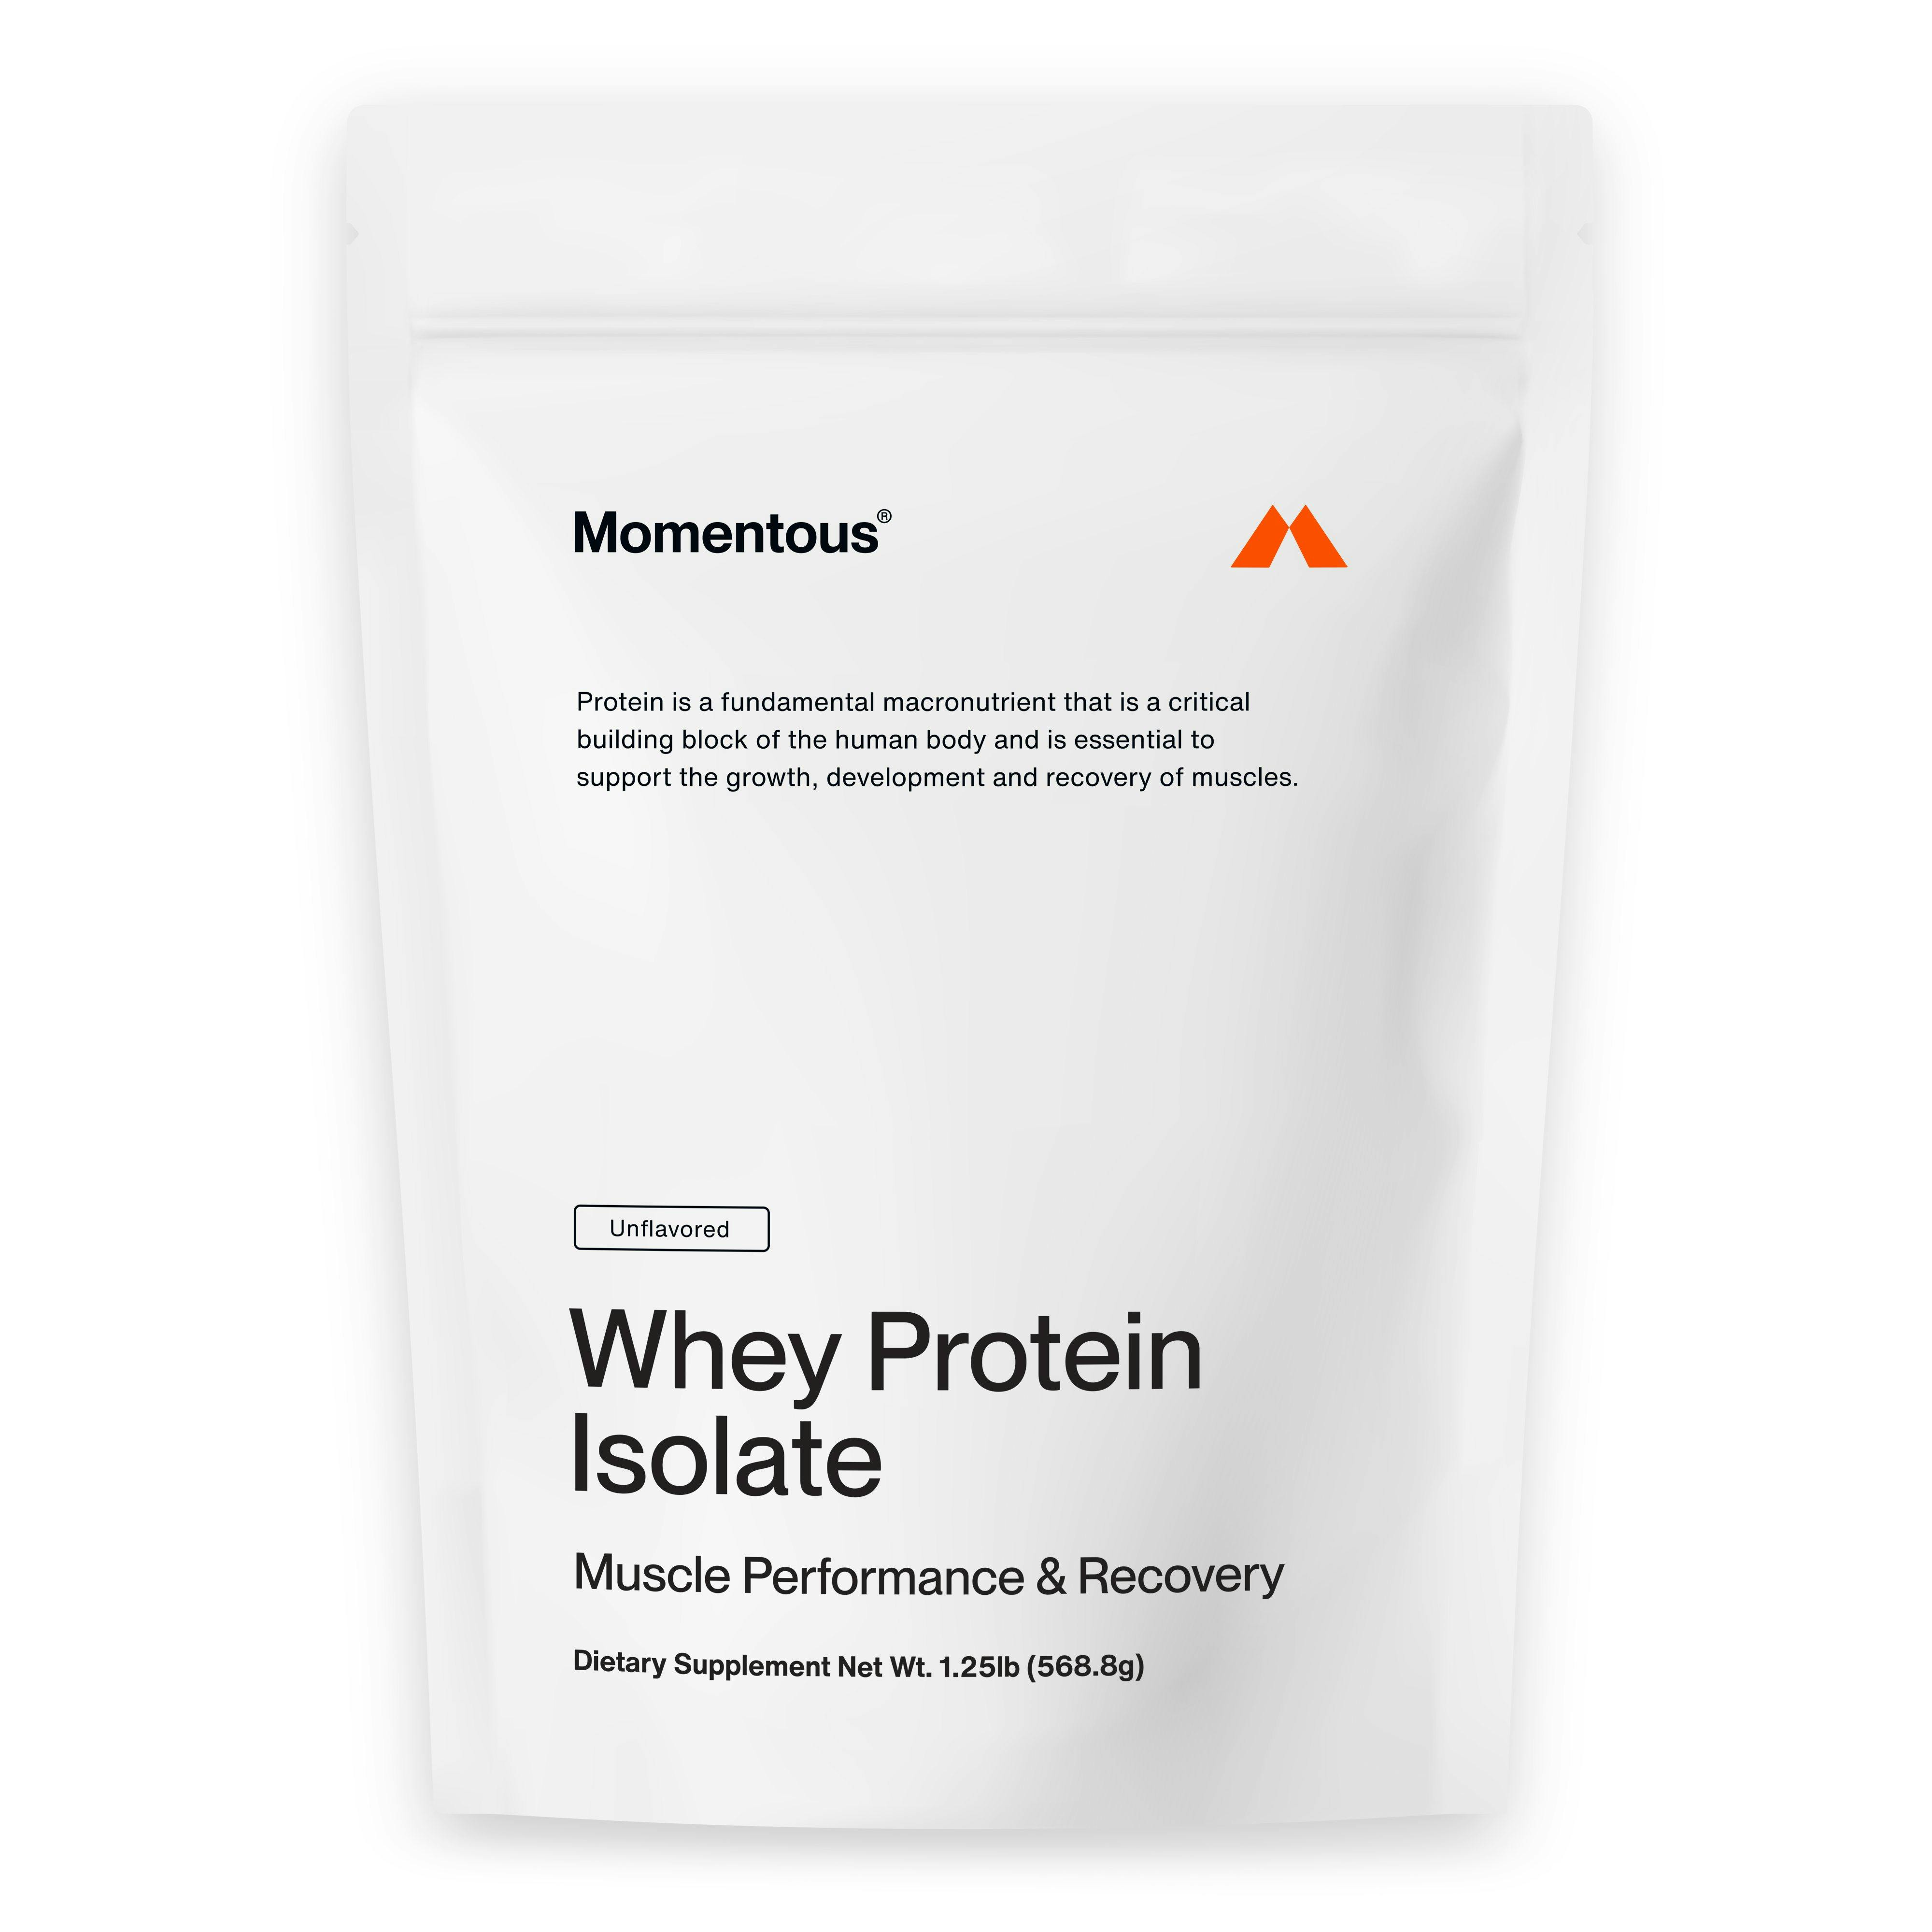 Momentous Grass Fed Whey Protein - Unflavored, Gym & Wellness